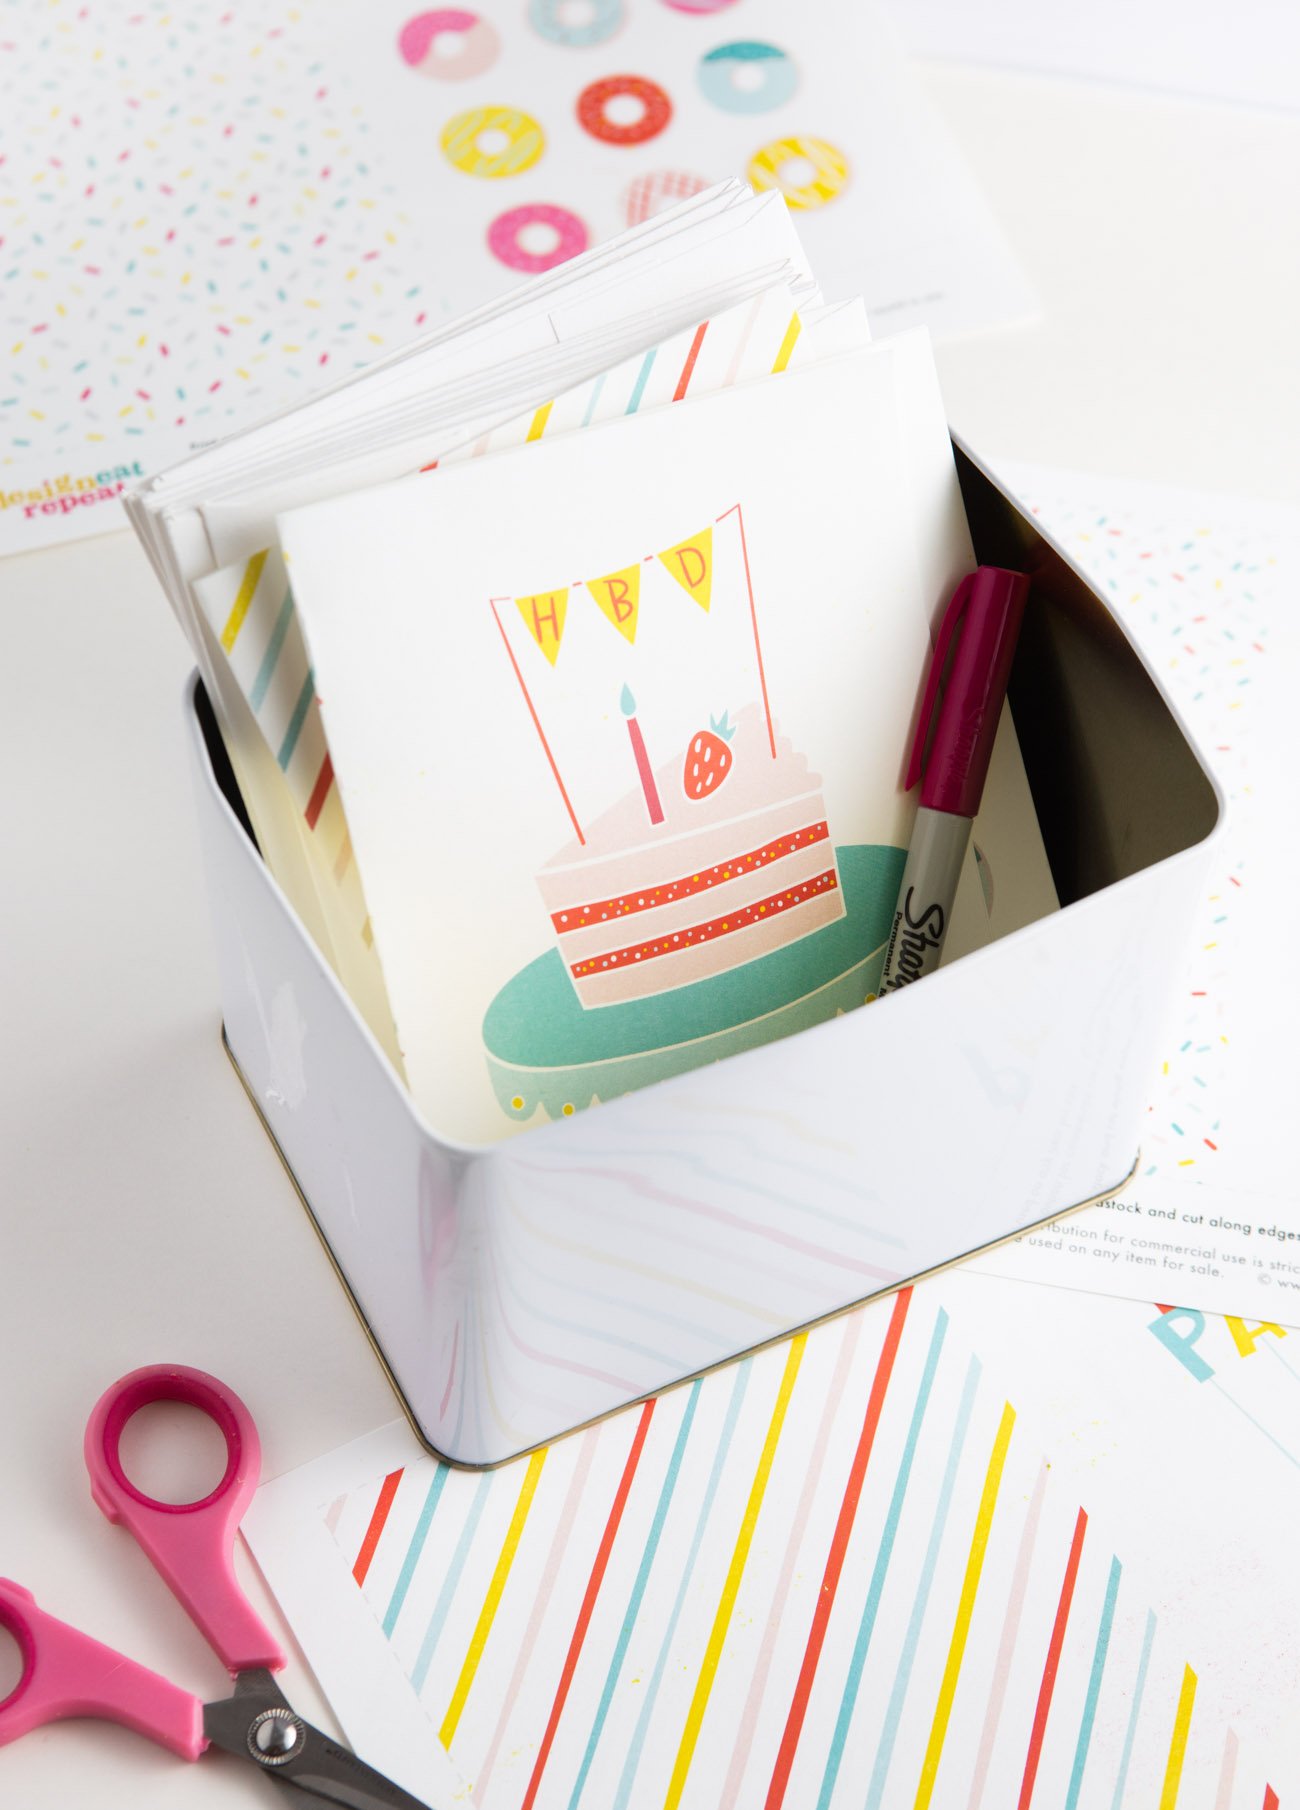 Box of greeting cards to keep on hand - Free Printable Cake Birthday Card - slice of cake on cake stand with HBD pennant banner